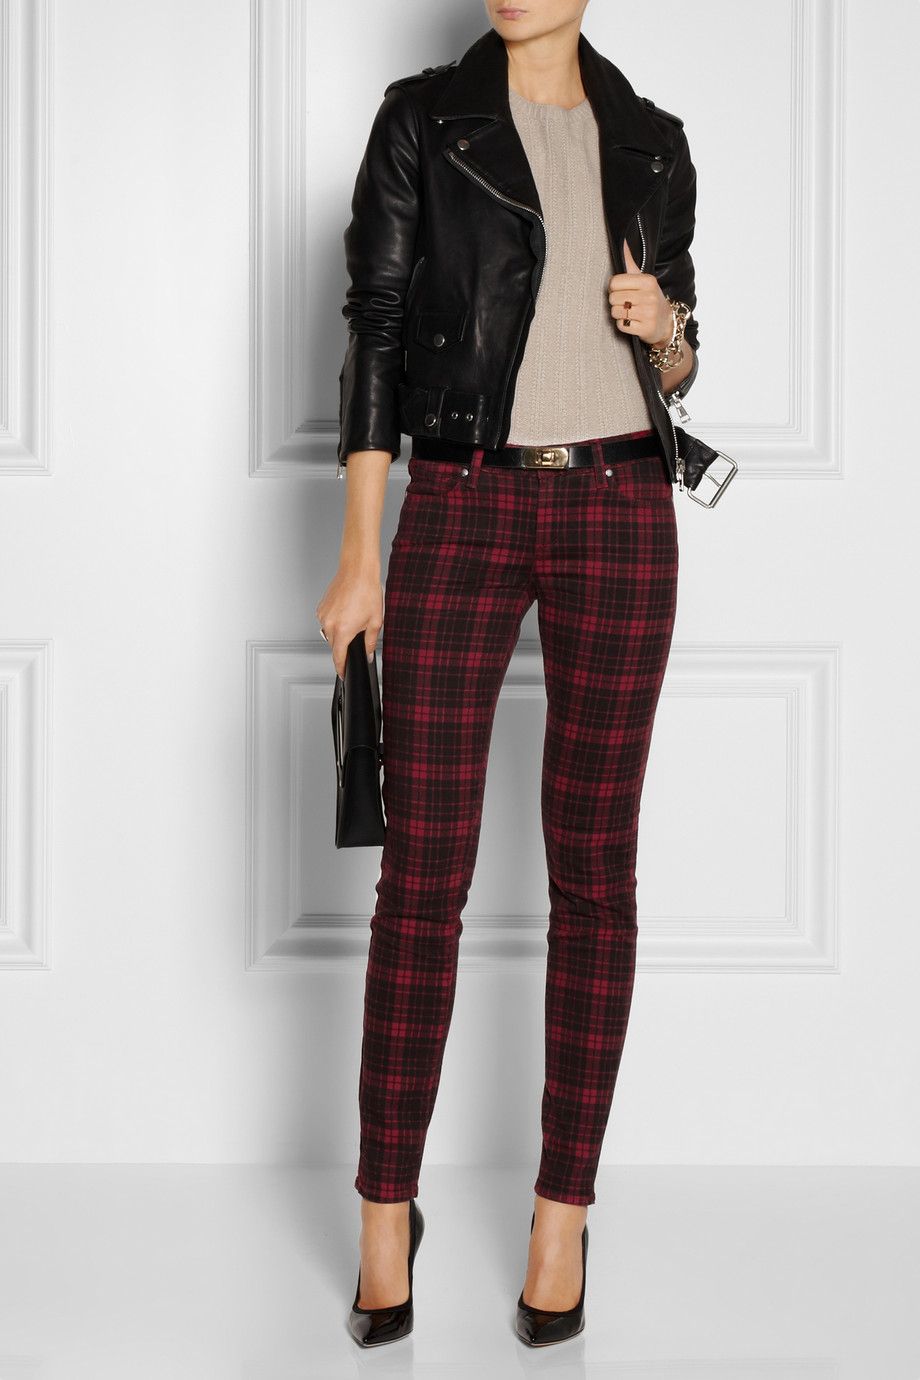 How to Wear Plaid Skinny Pants: Best 15 Stylish Outfit Ideas for Women